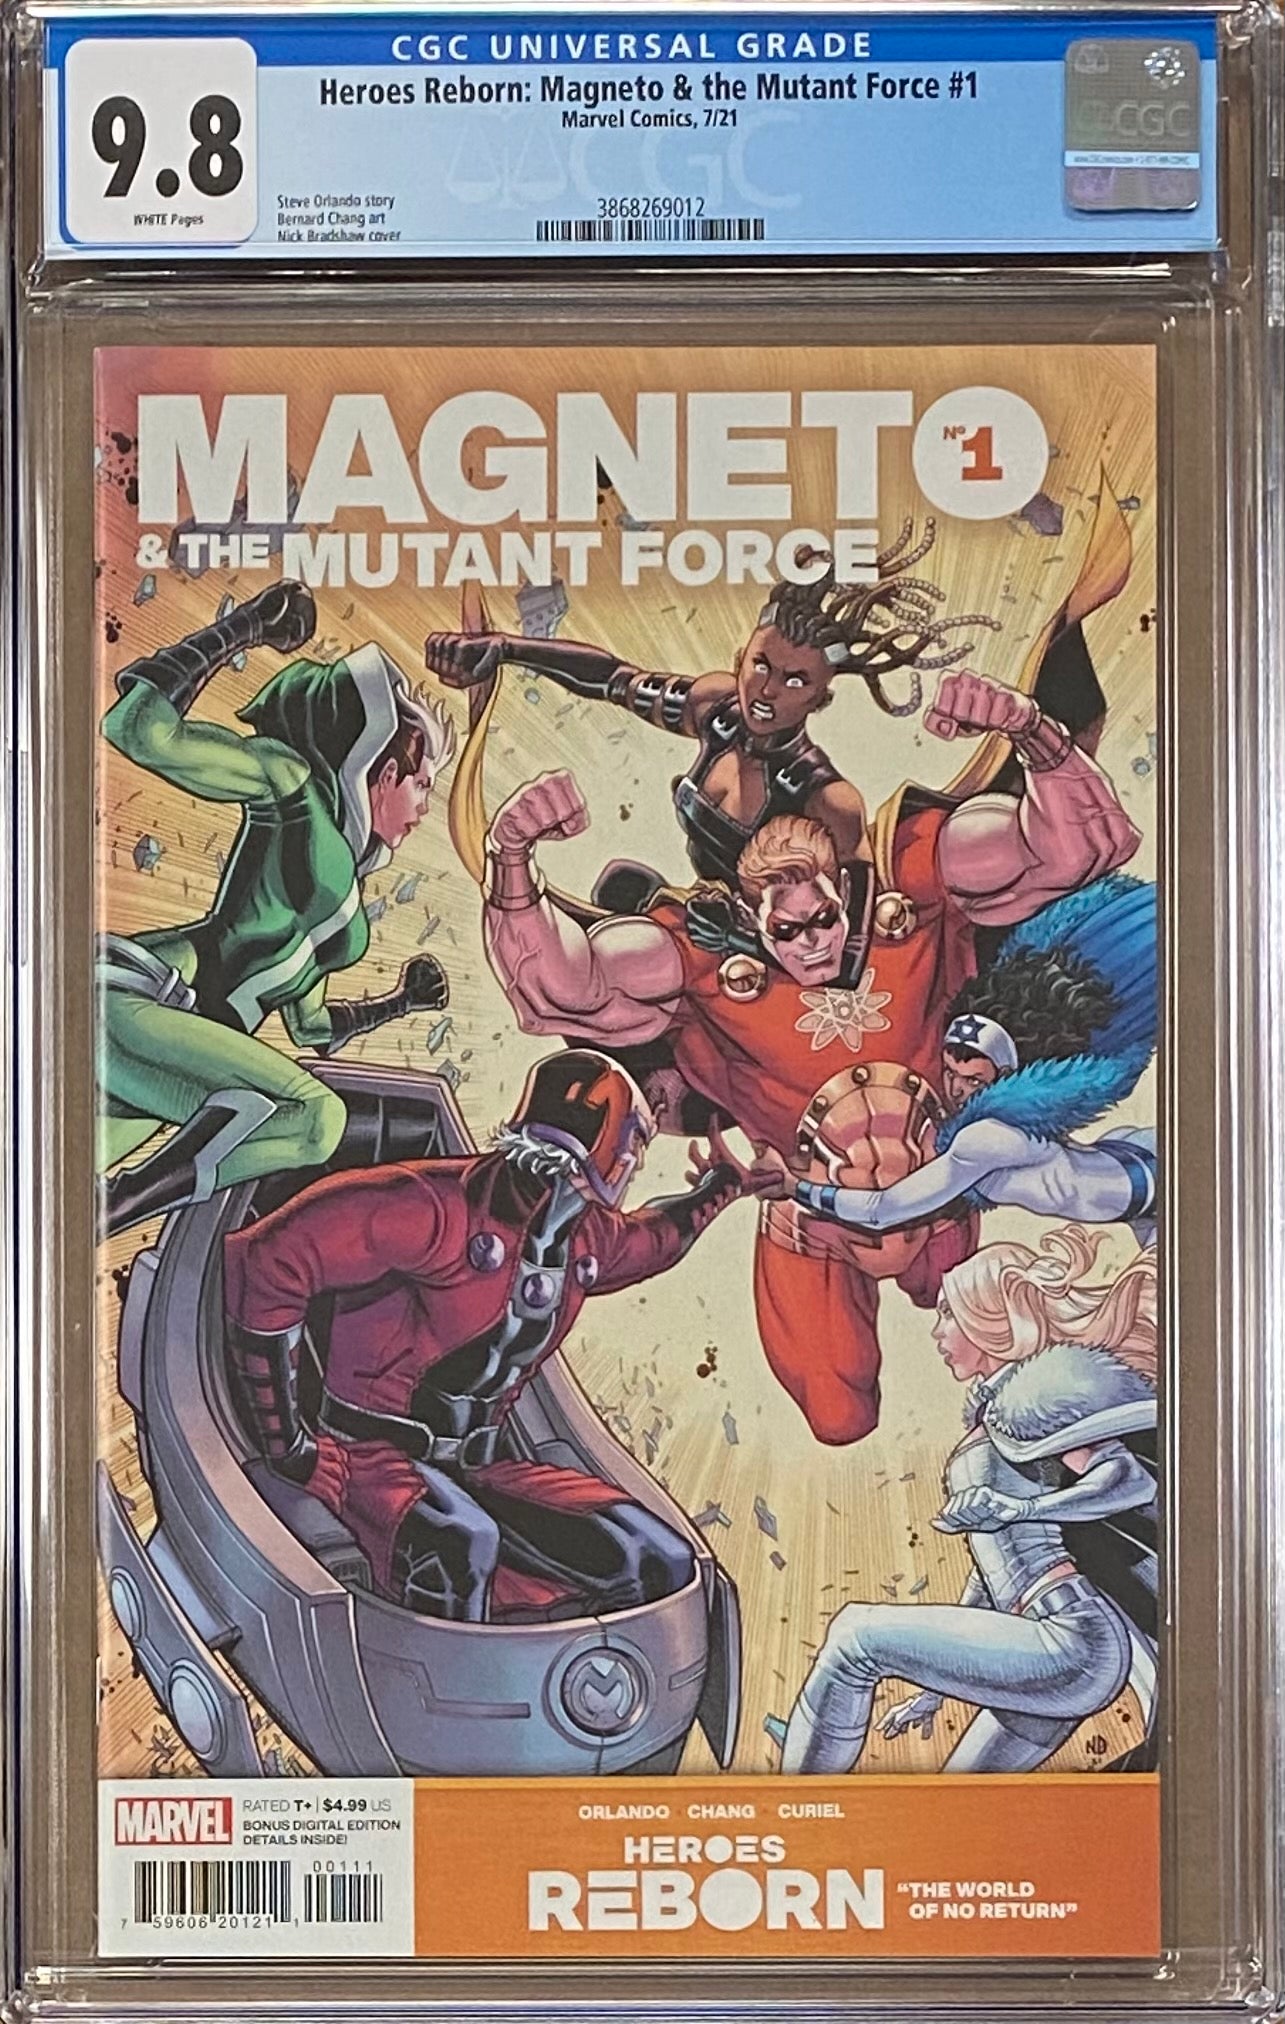 Heroes Reborn: Magneto and the Mutant Force #1 CGC 9.8